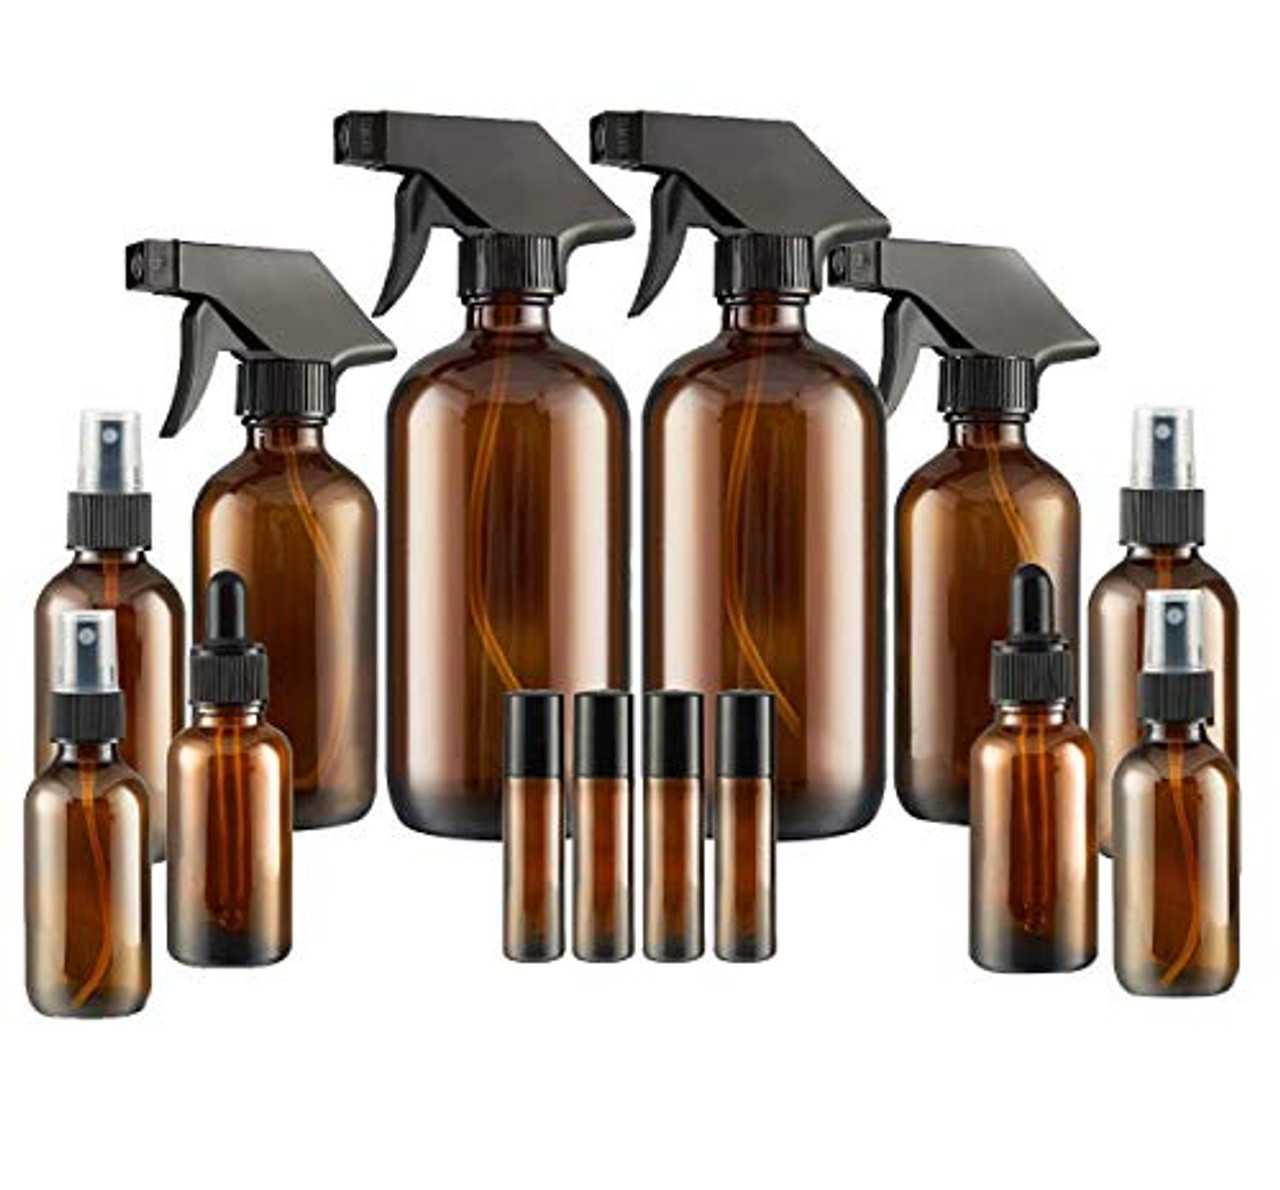 Spray Bottles in Cleaning Tools 